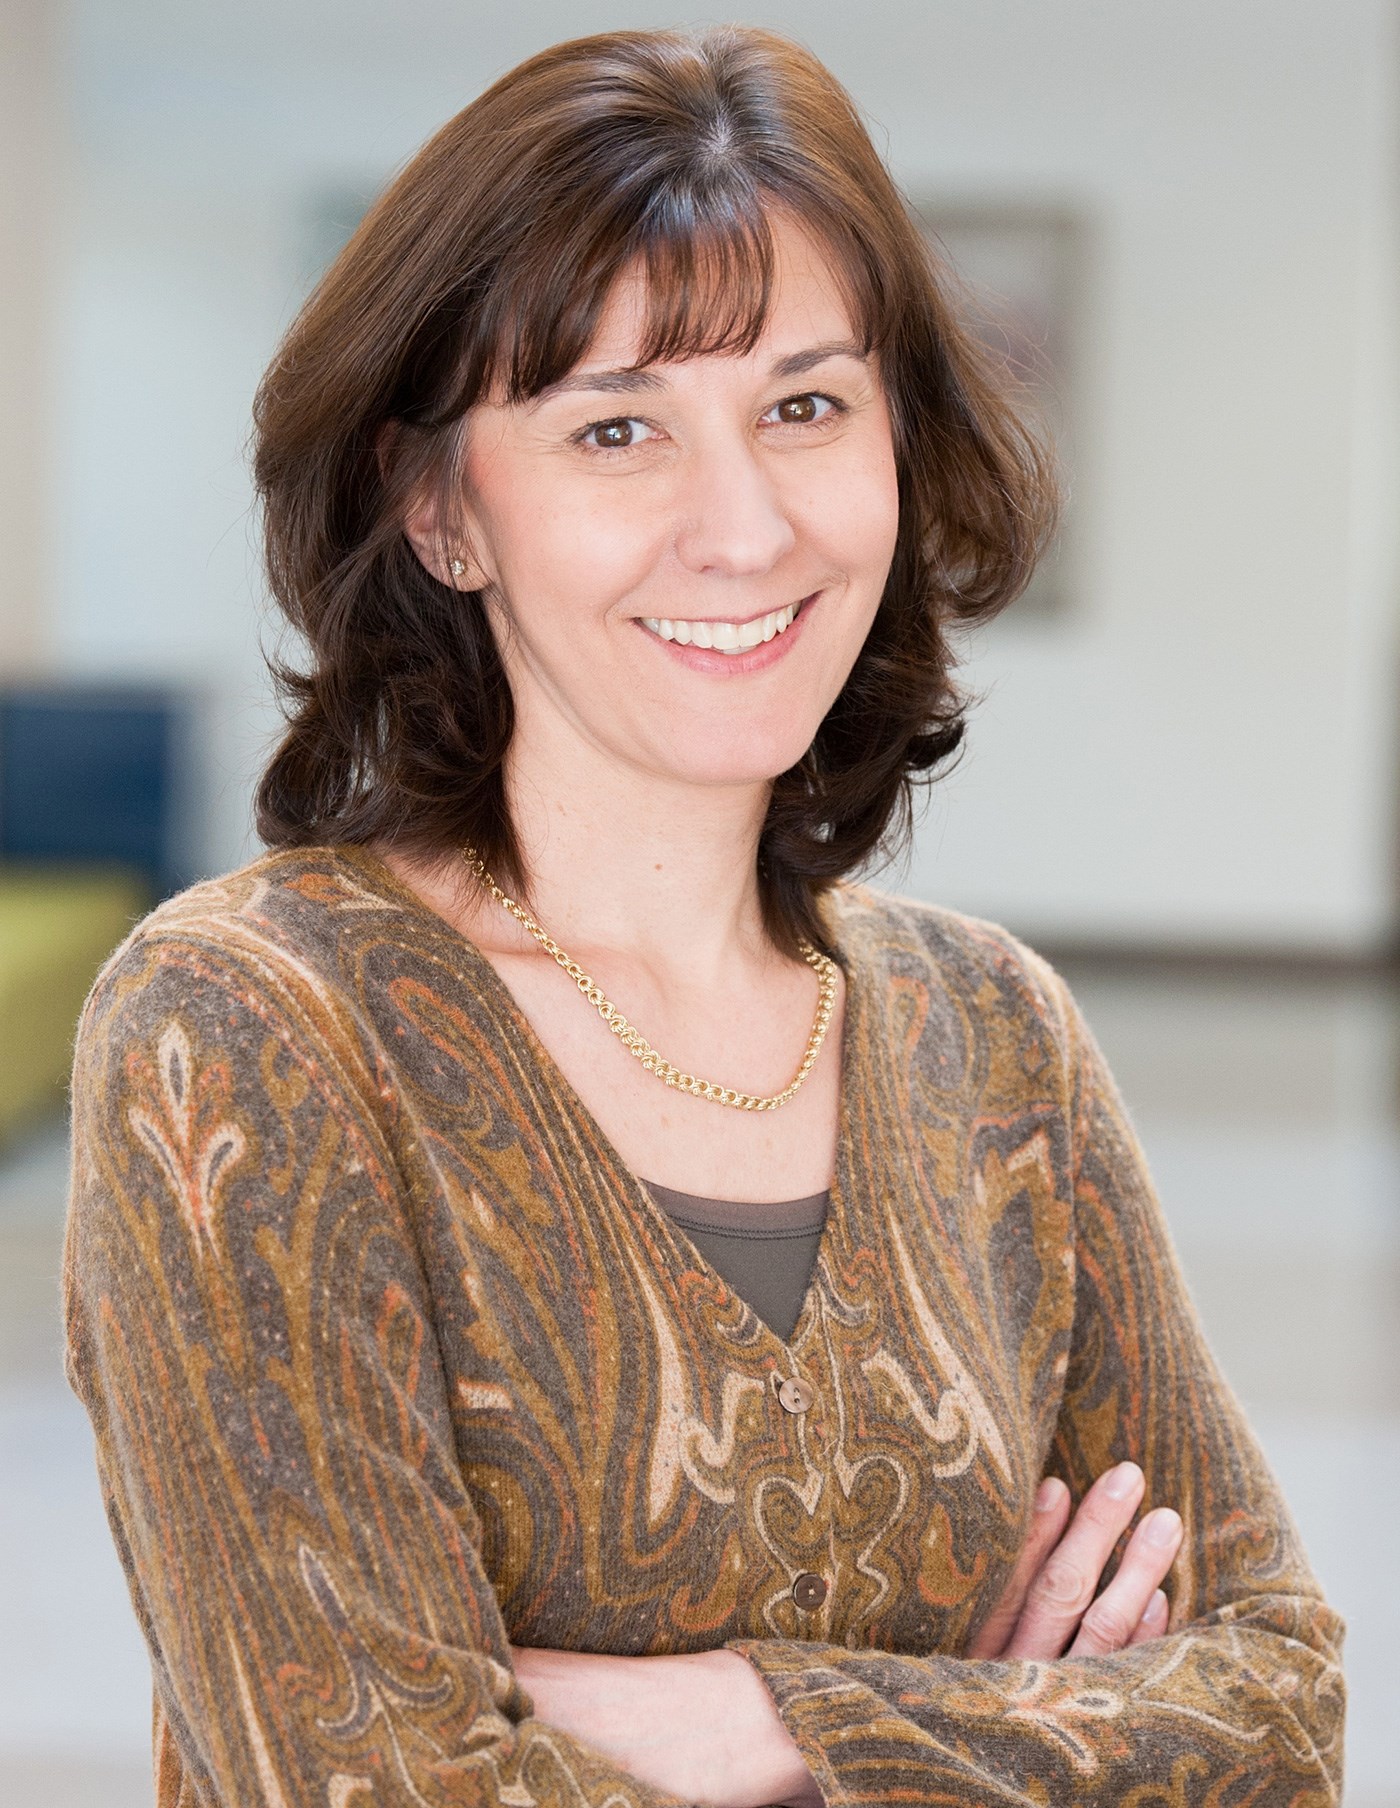 Laurie Soroken is the Director of Baccalaureate Program, Clinical Associate Professor in the College of Nursing and UMass Lowell Center for Population Health